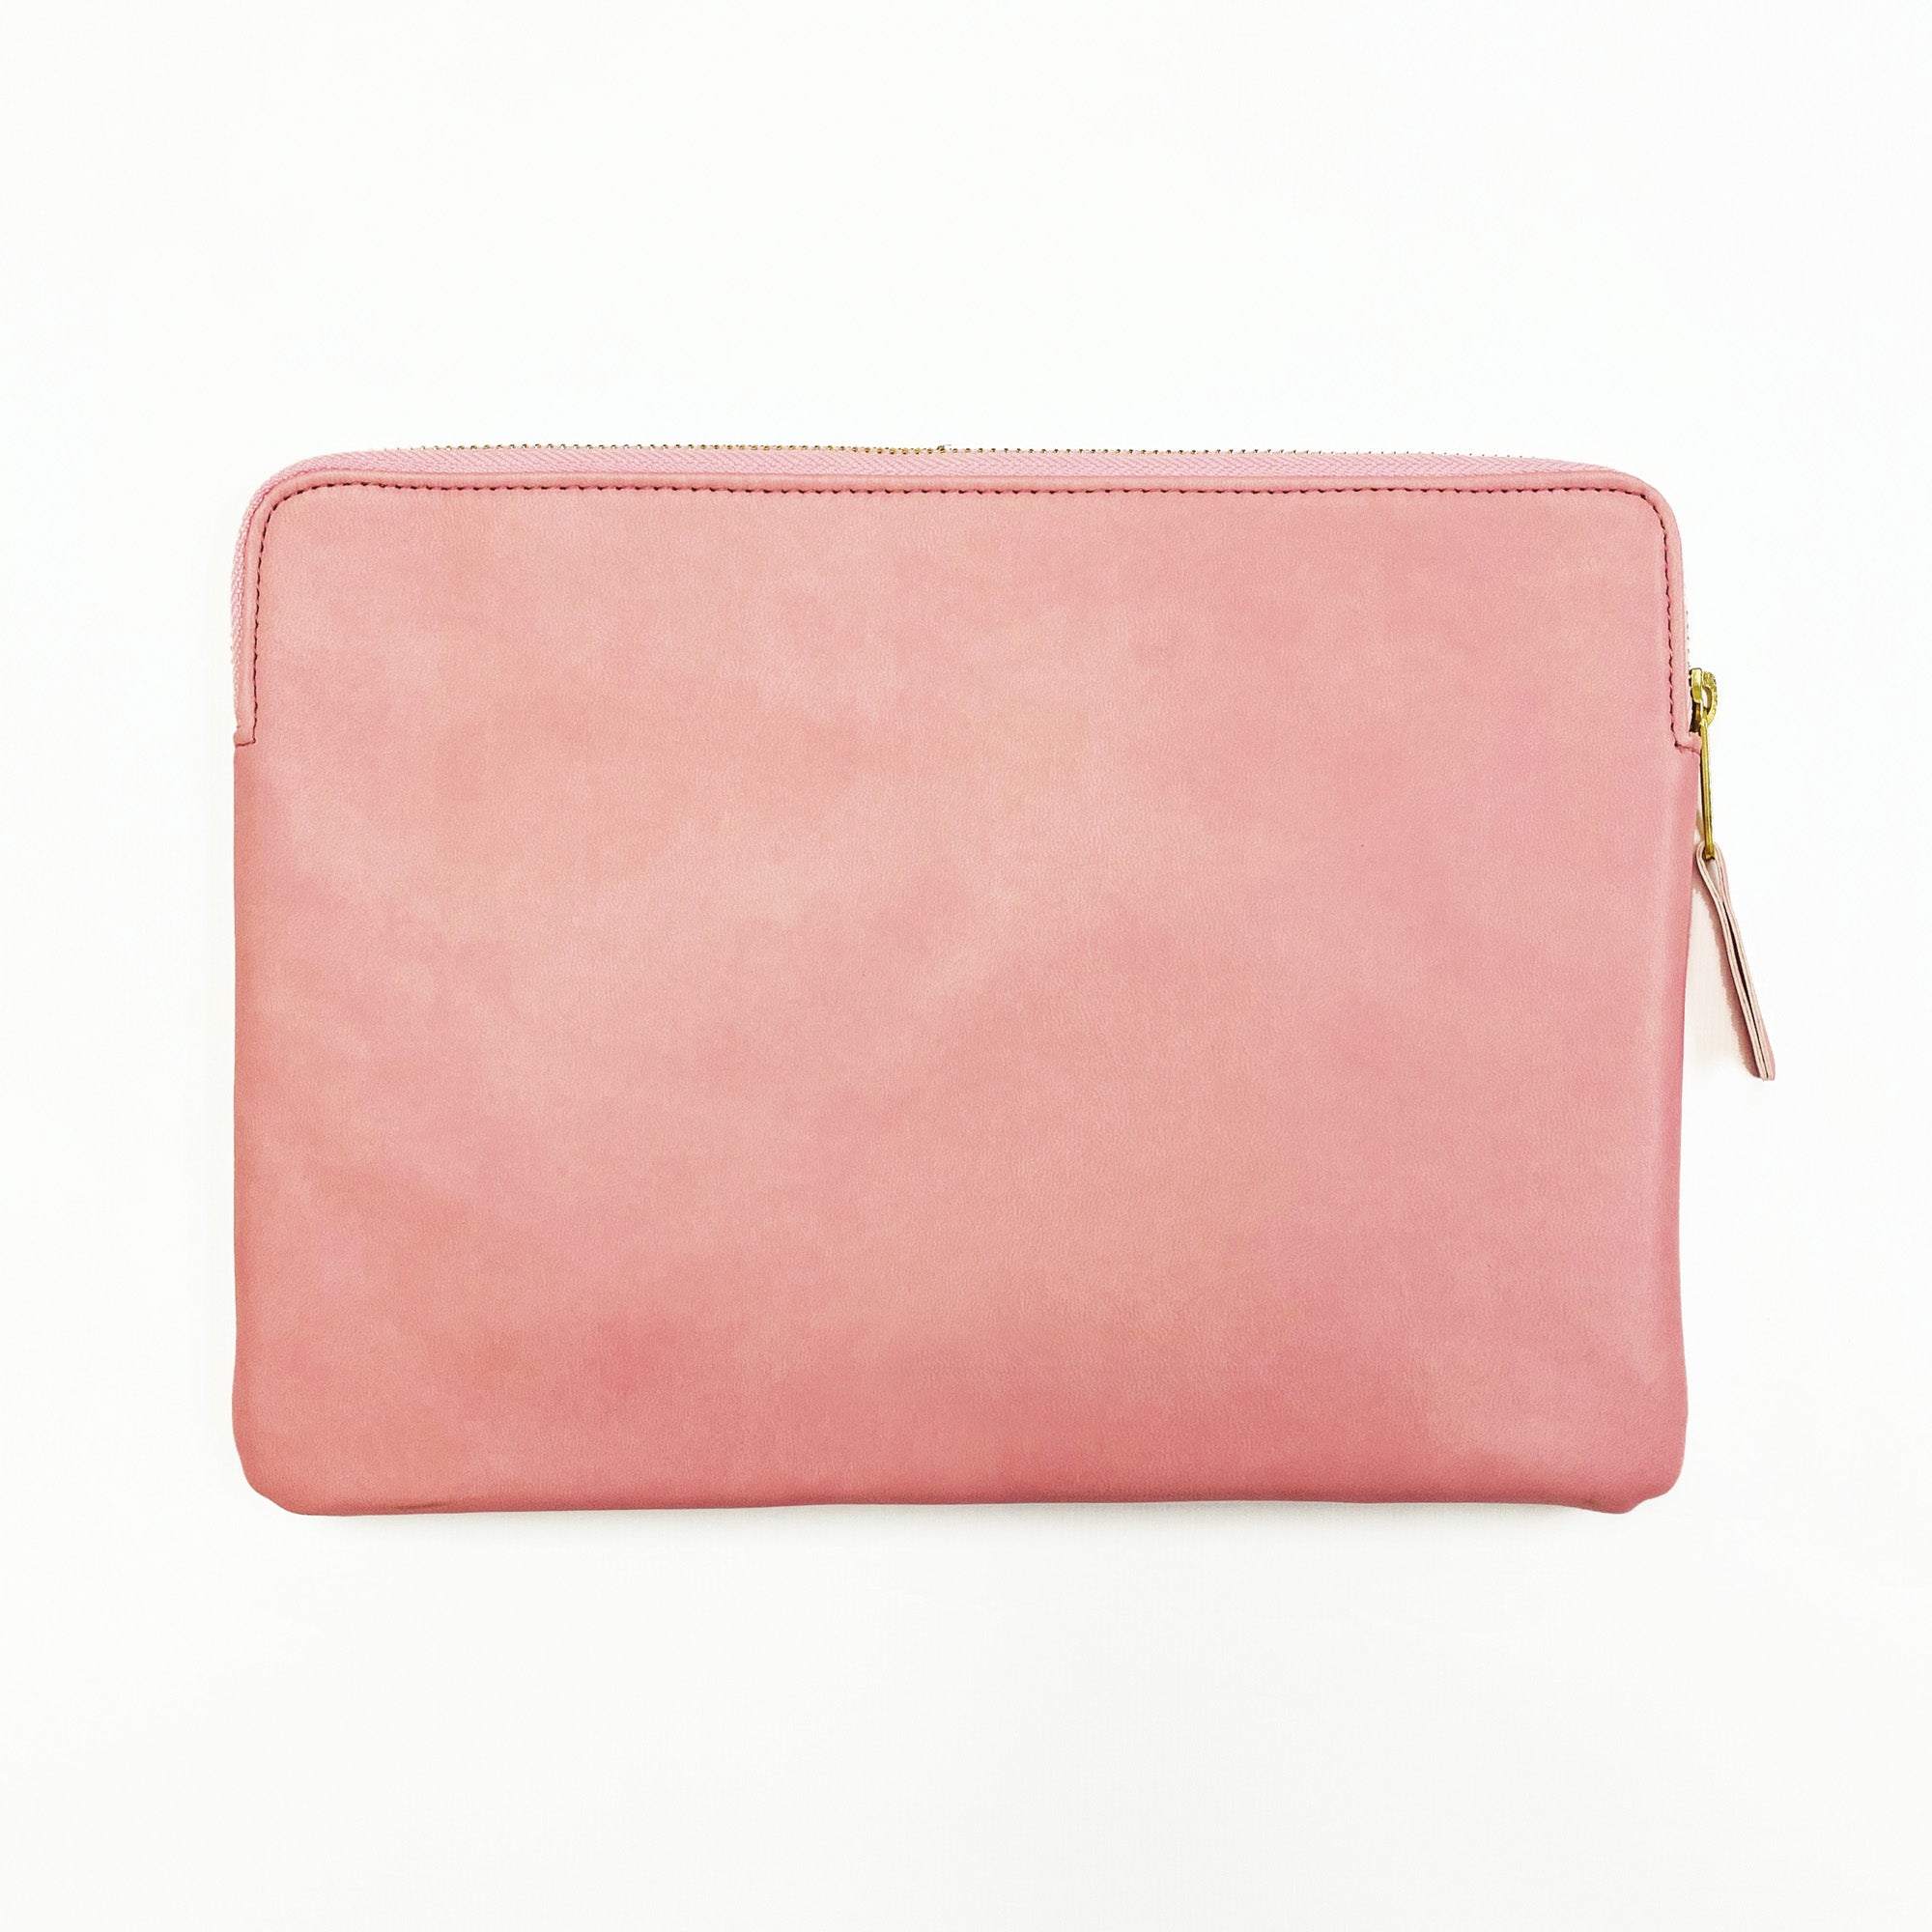 Rose Pink Tablet sleeve with YKK zipper closure